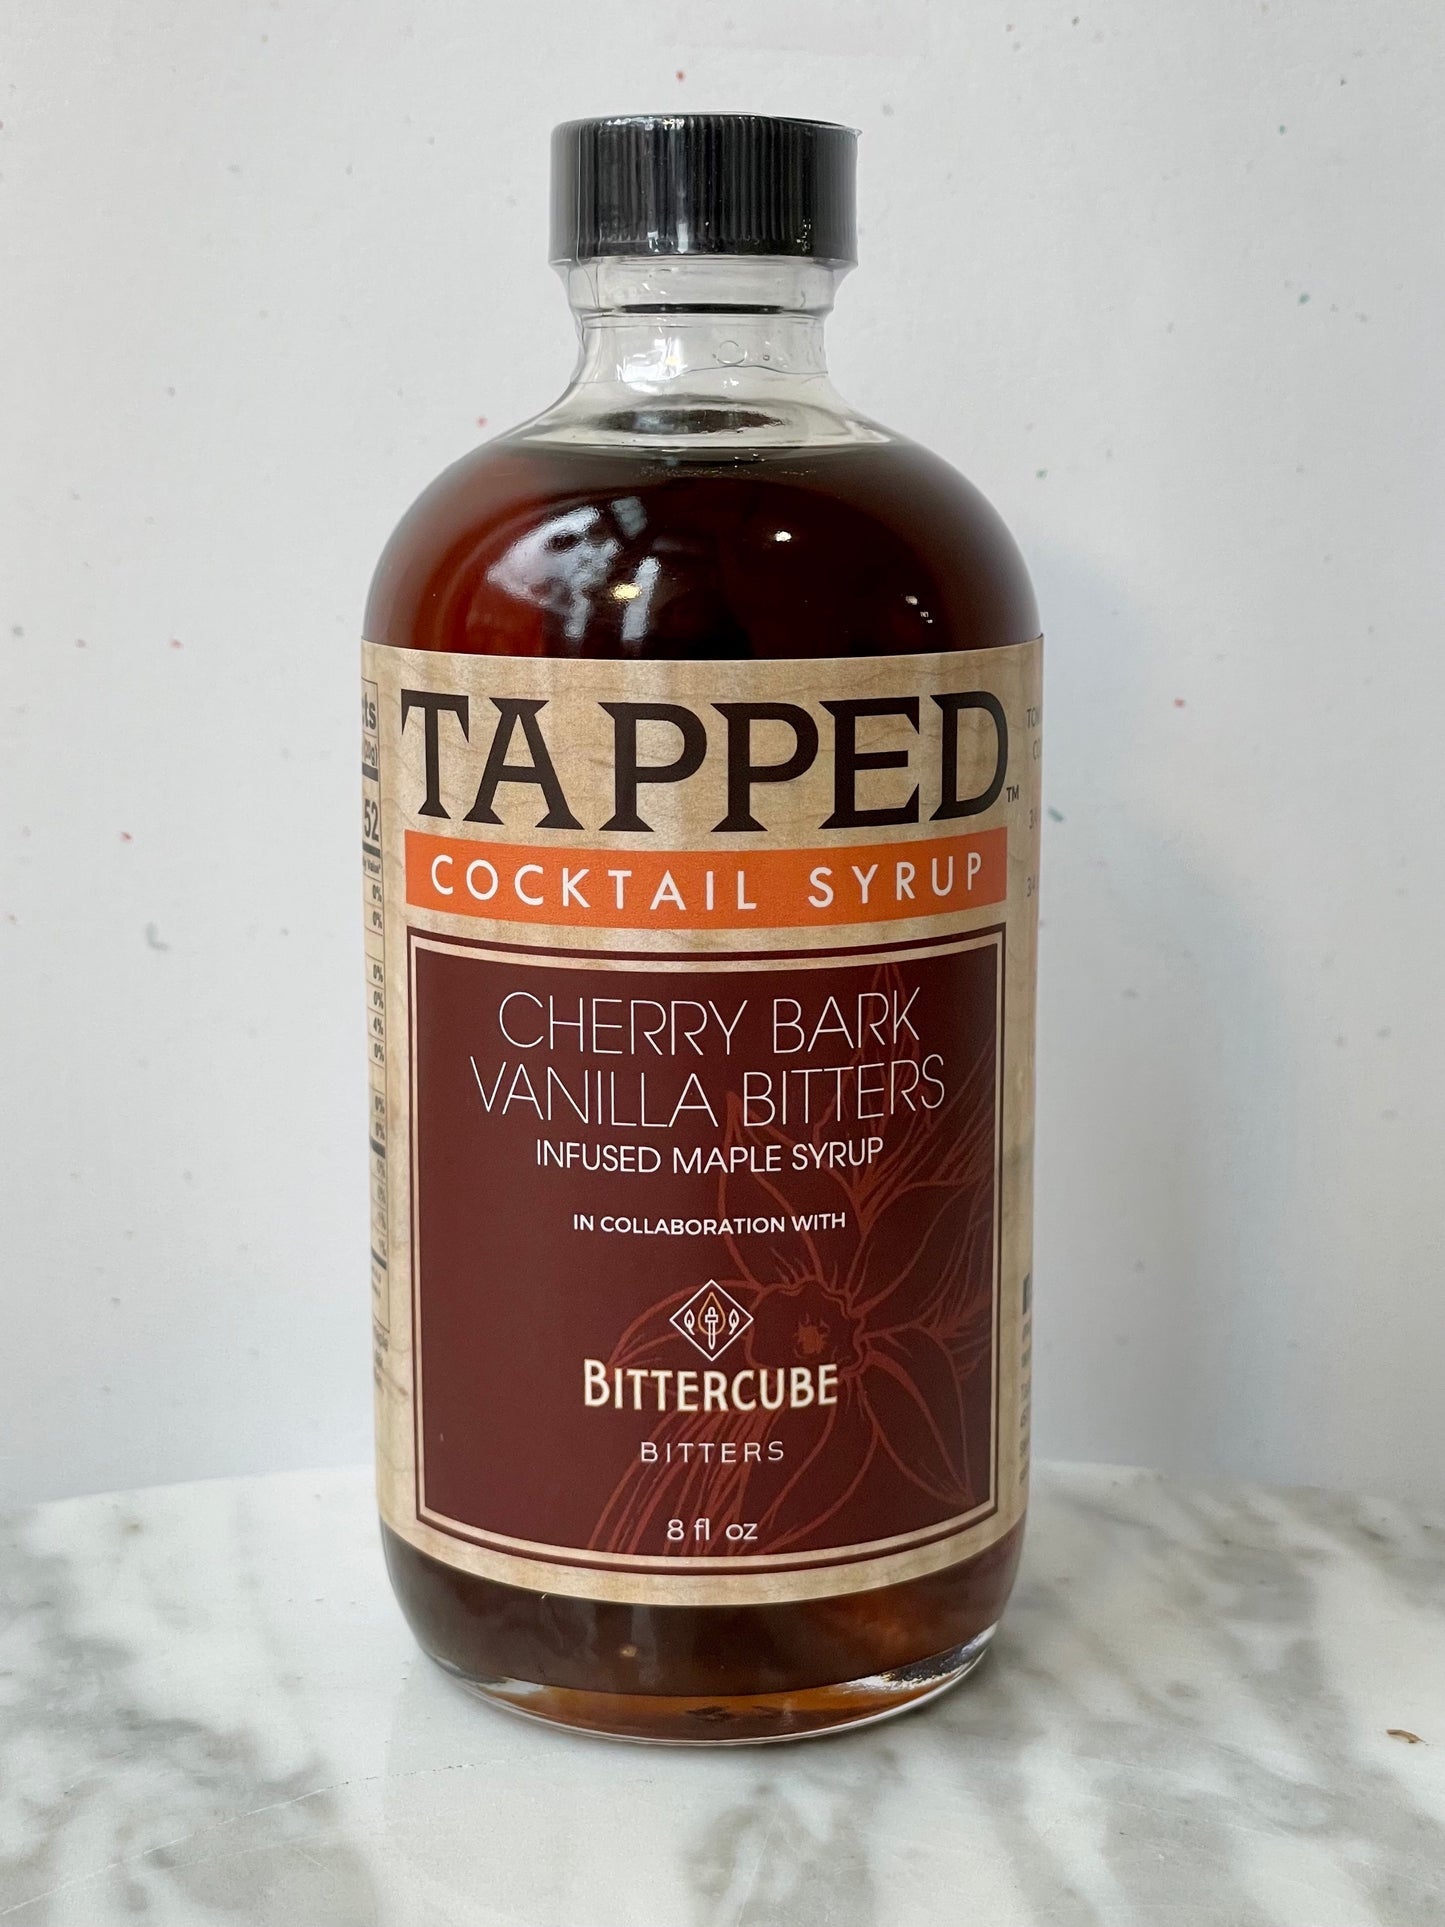 Tapped Cherry Bark Vanillla Bitters Syrup